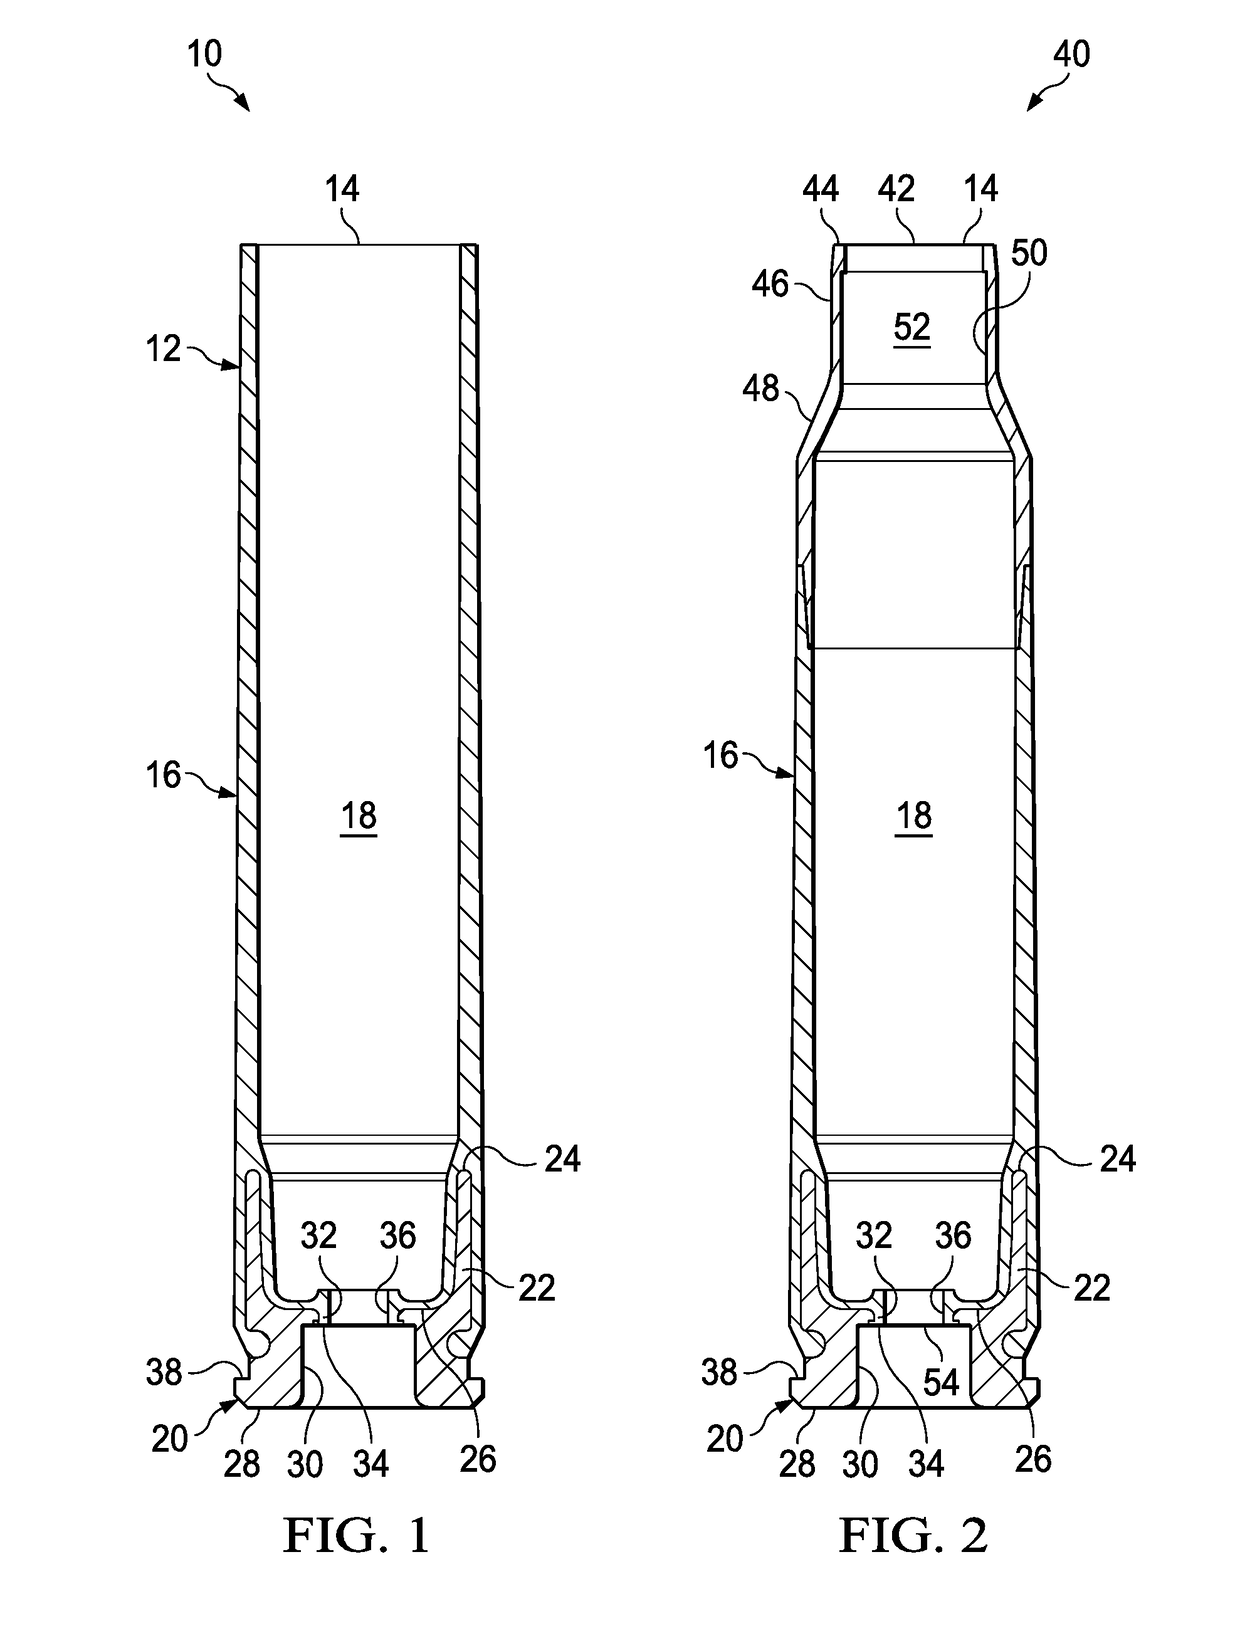 One piece polymer ammunition cartridge having a primer insert and methods of making the same